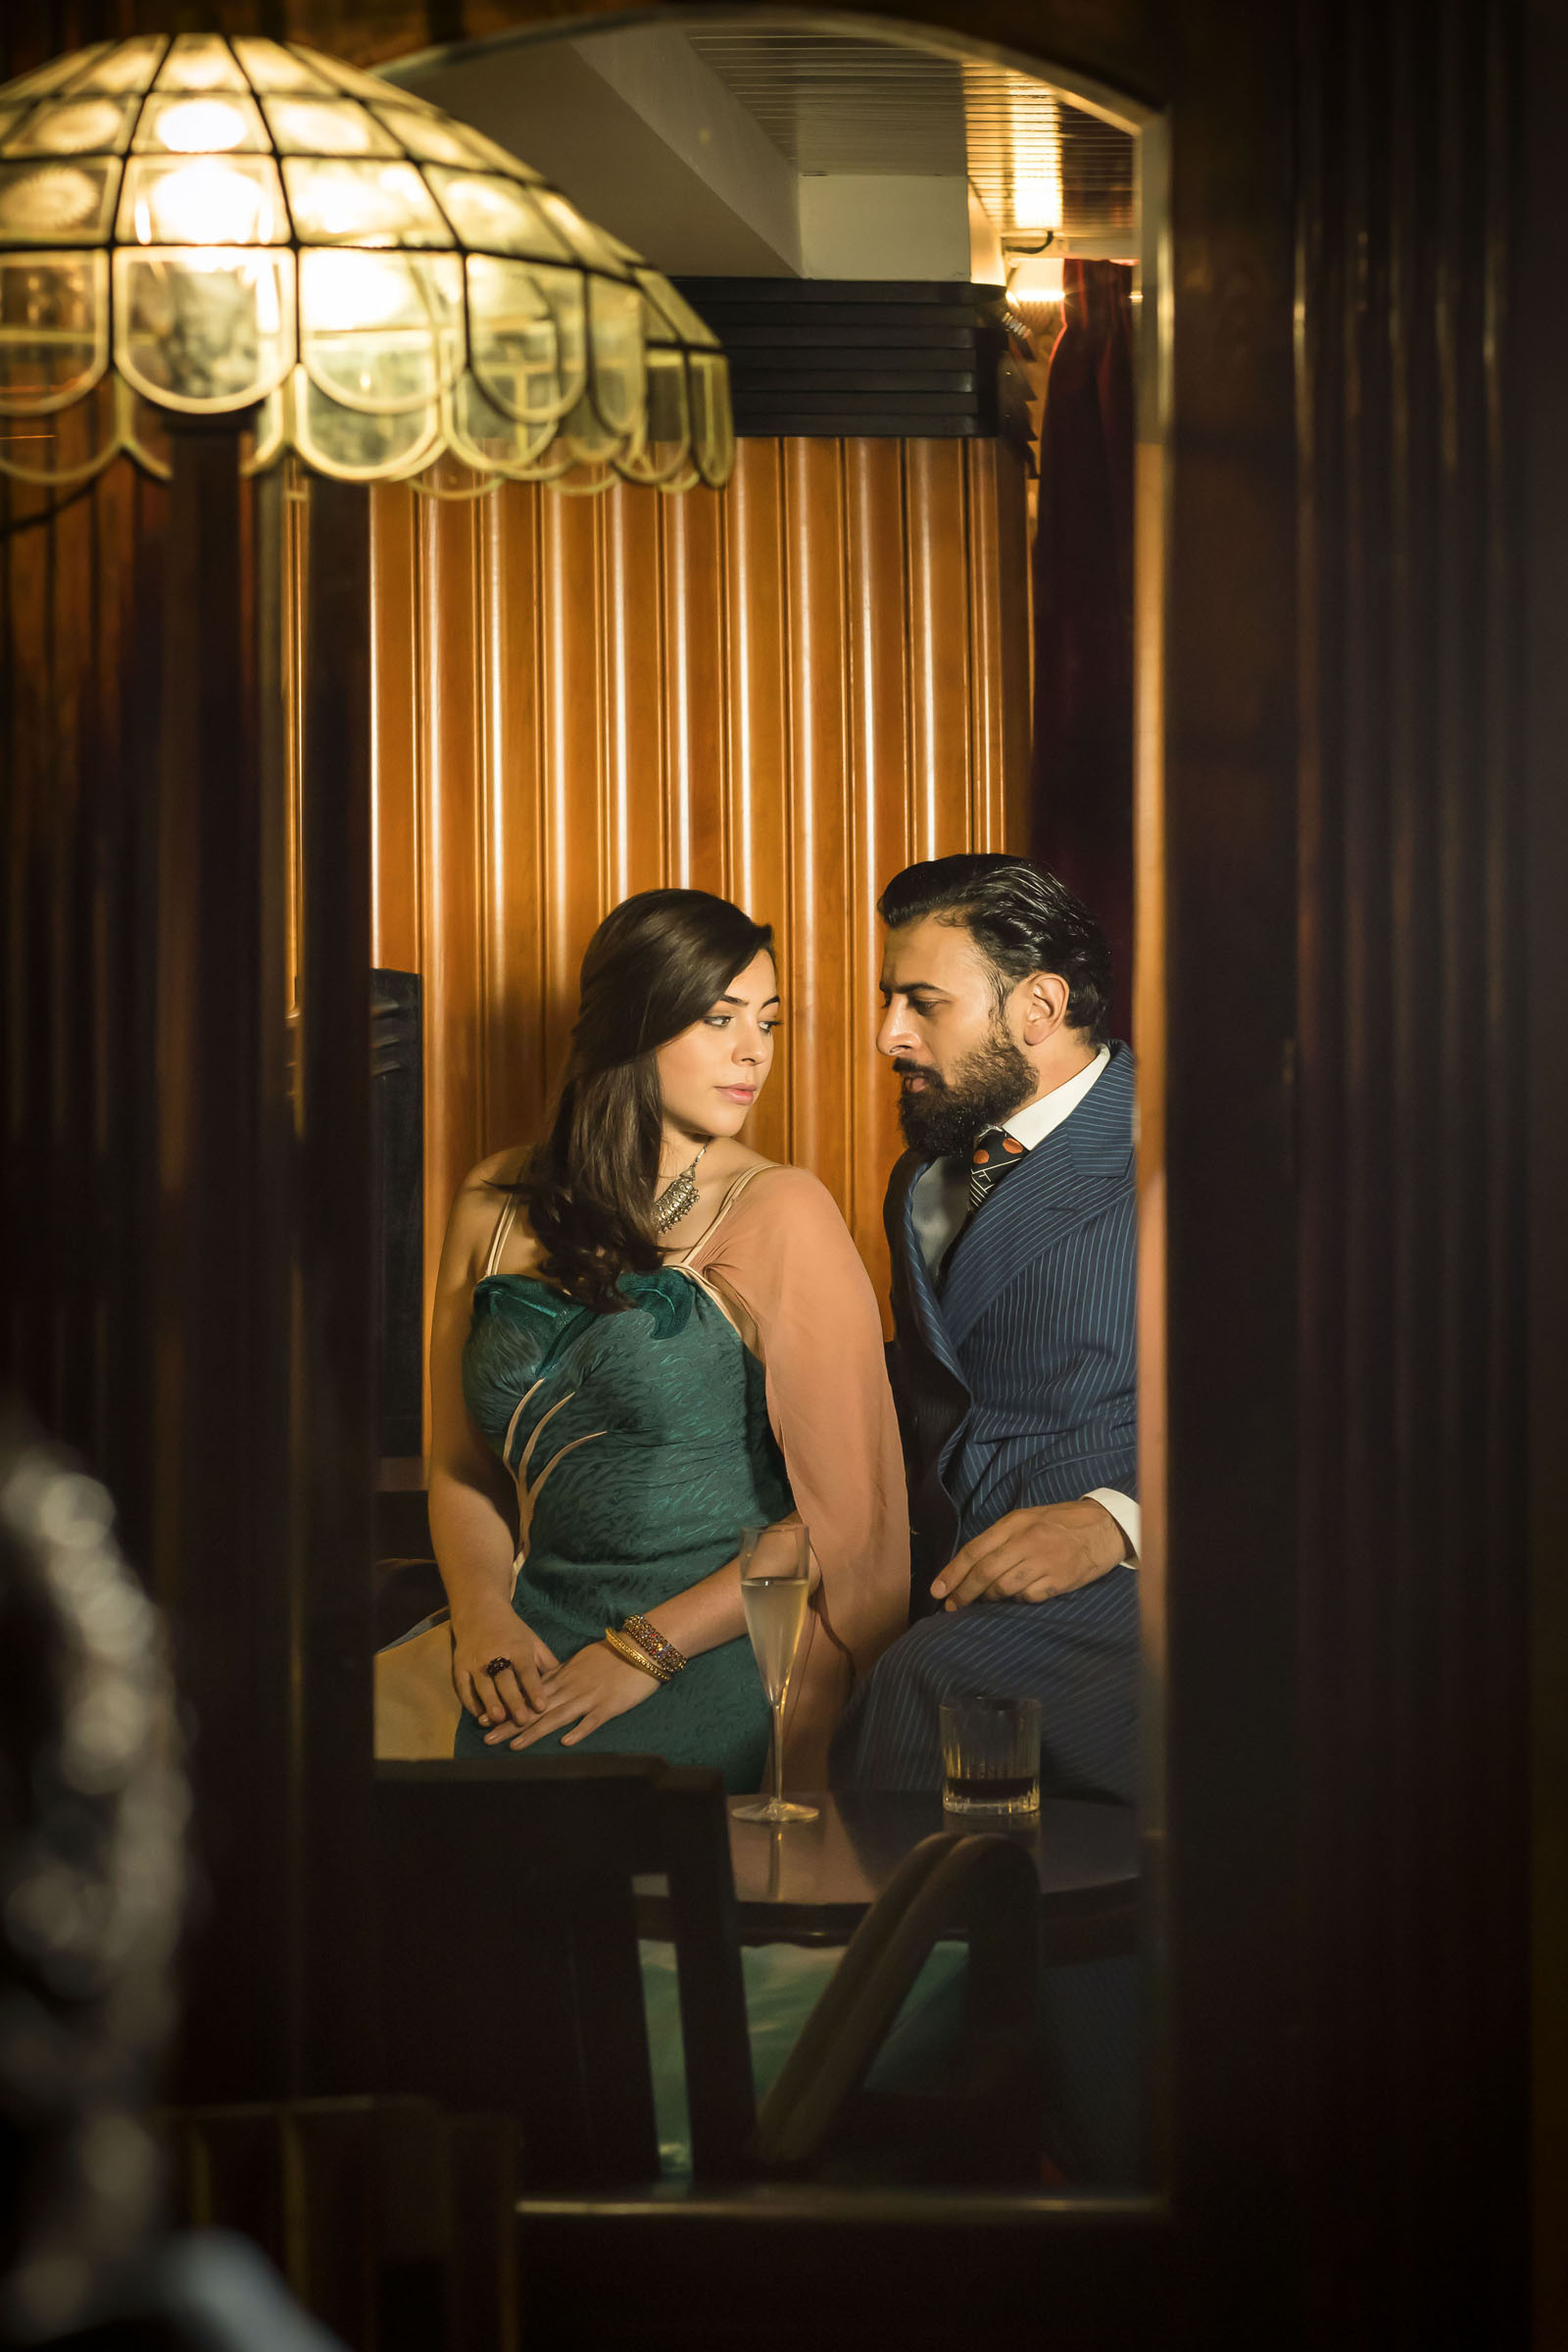 A reflection of Sophie Khan Levy as Ursula and Vikash Bhai as Cyrus Irani in the Art Deco surroundings of Dishoom in Kensington